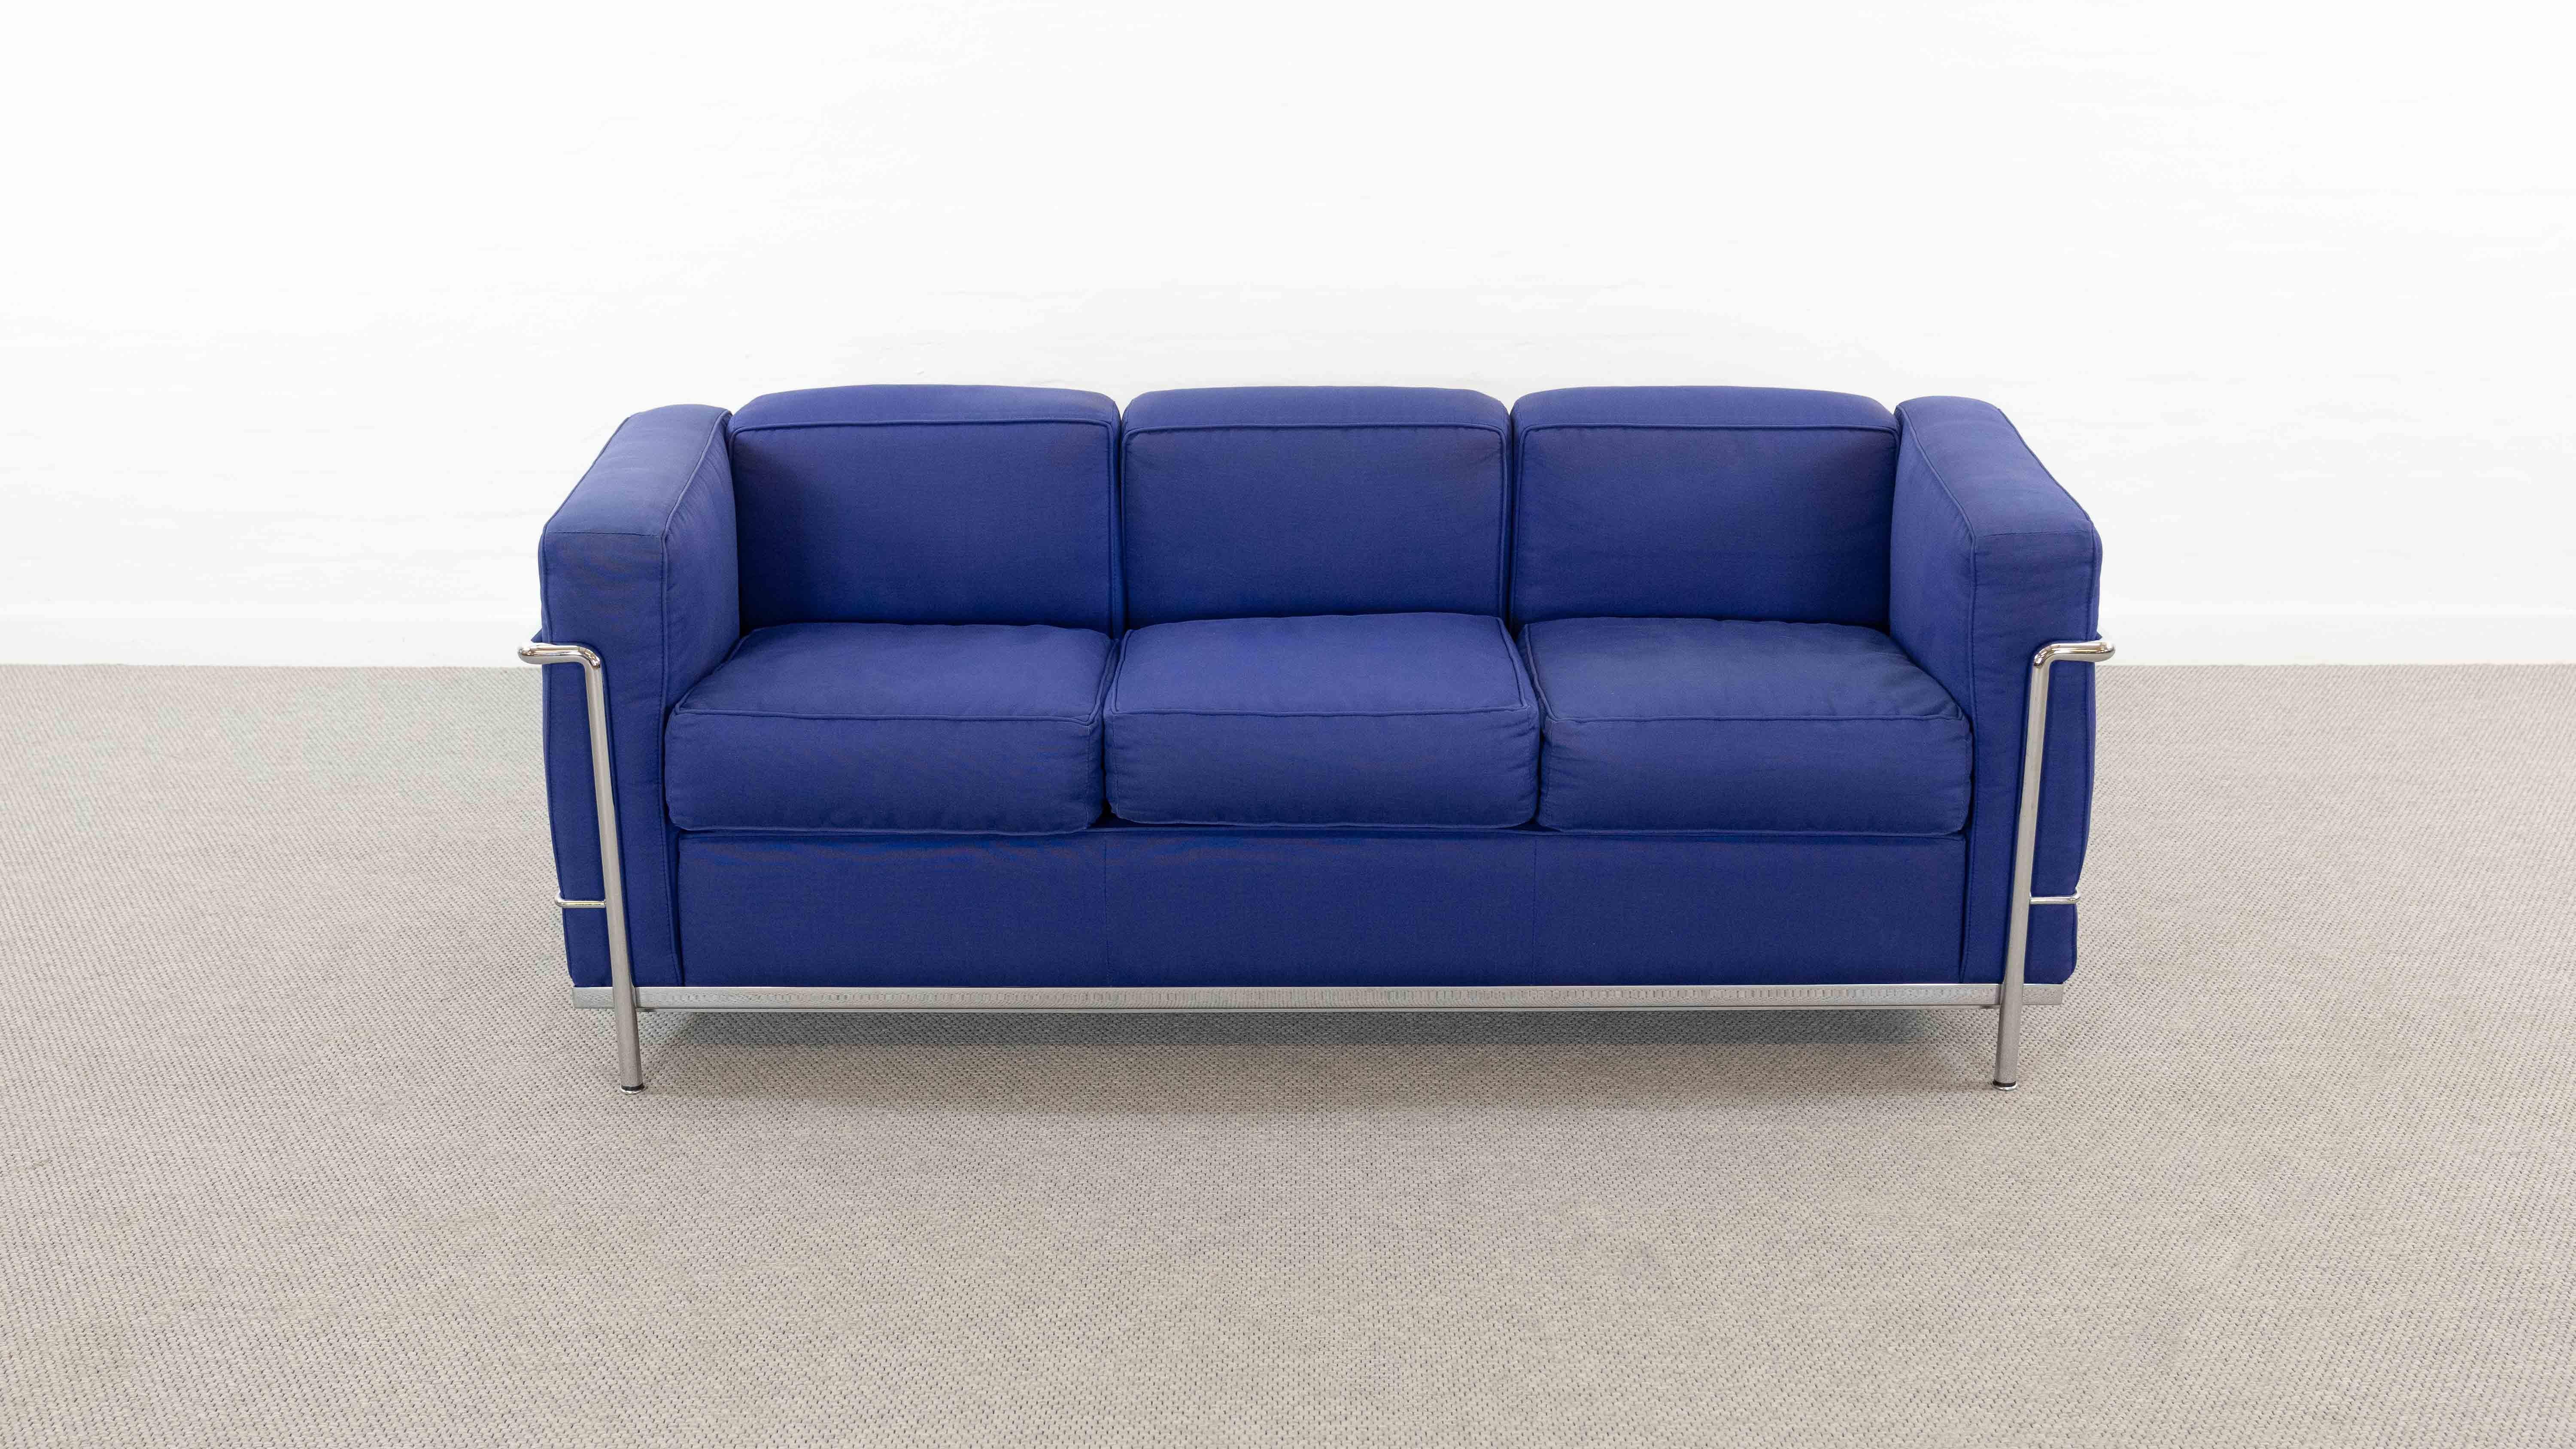 Iconic Designclassic:
LC2 3seat Sofa, designed 1928 by Le Corbusier, Charlotte Perriand and Pierre Jeanneret. Manufactured by Cassina, Italy. Upholstered in original blue fabrics.
Engraved marking with serial number and Cassina logo in lower